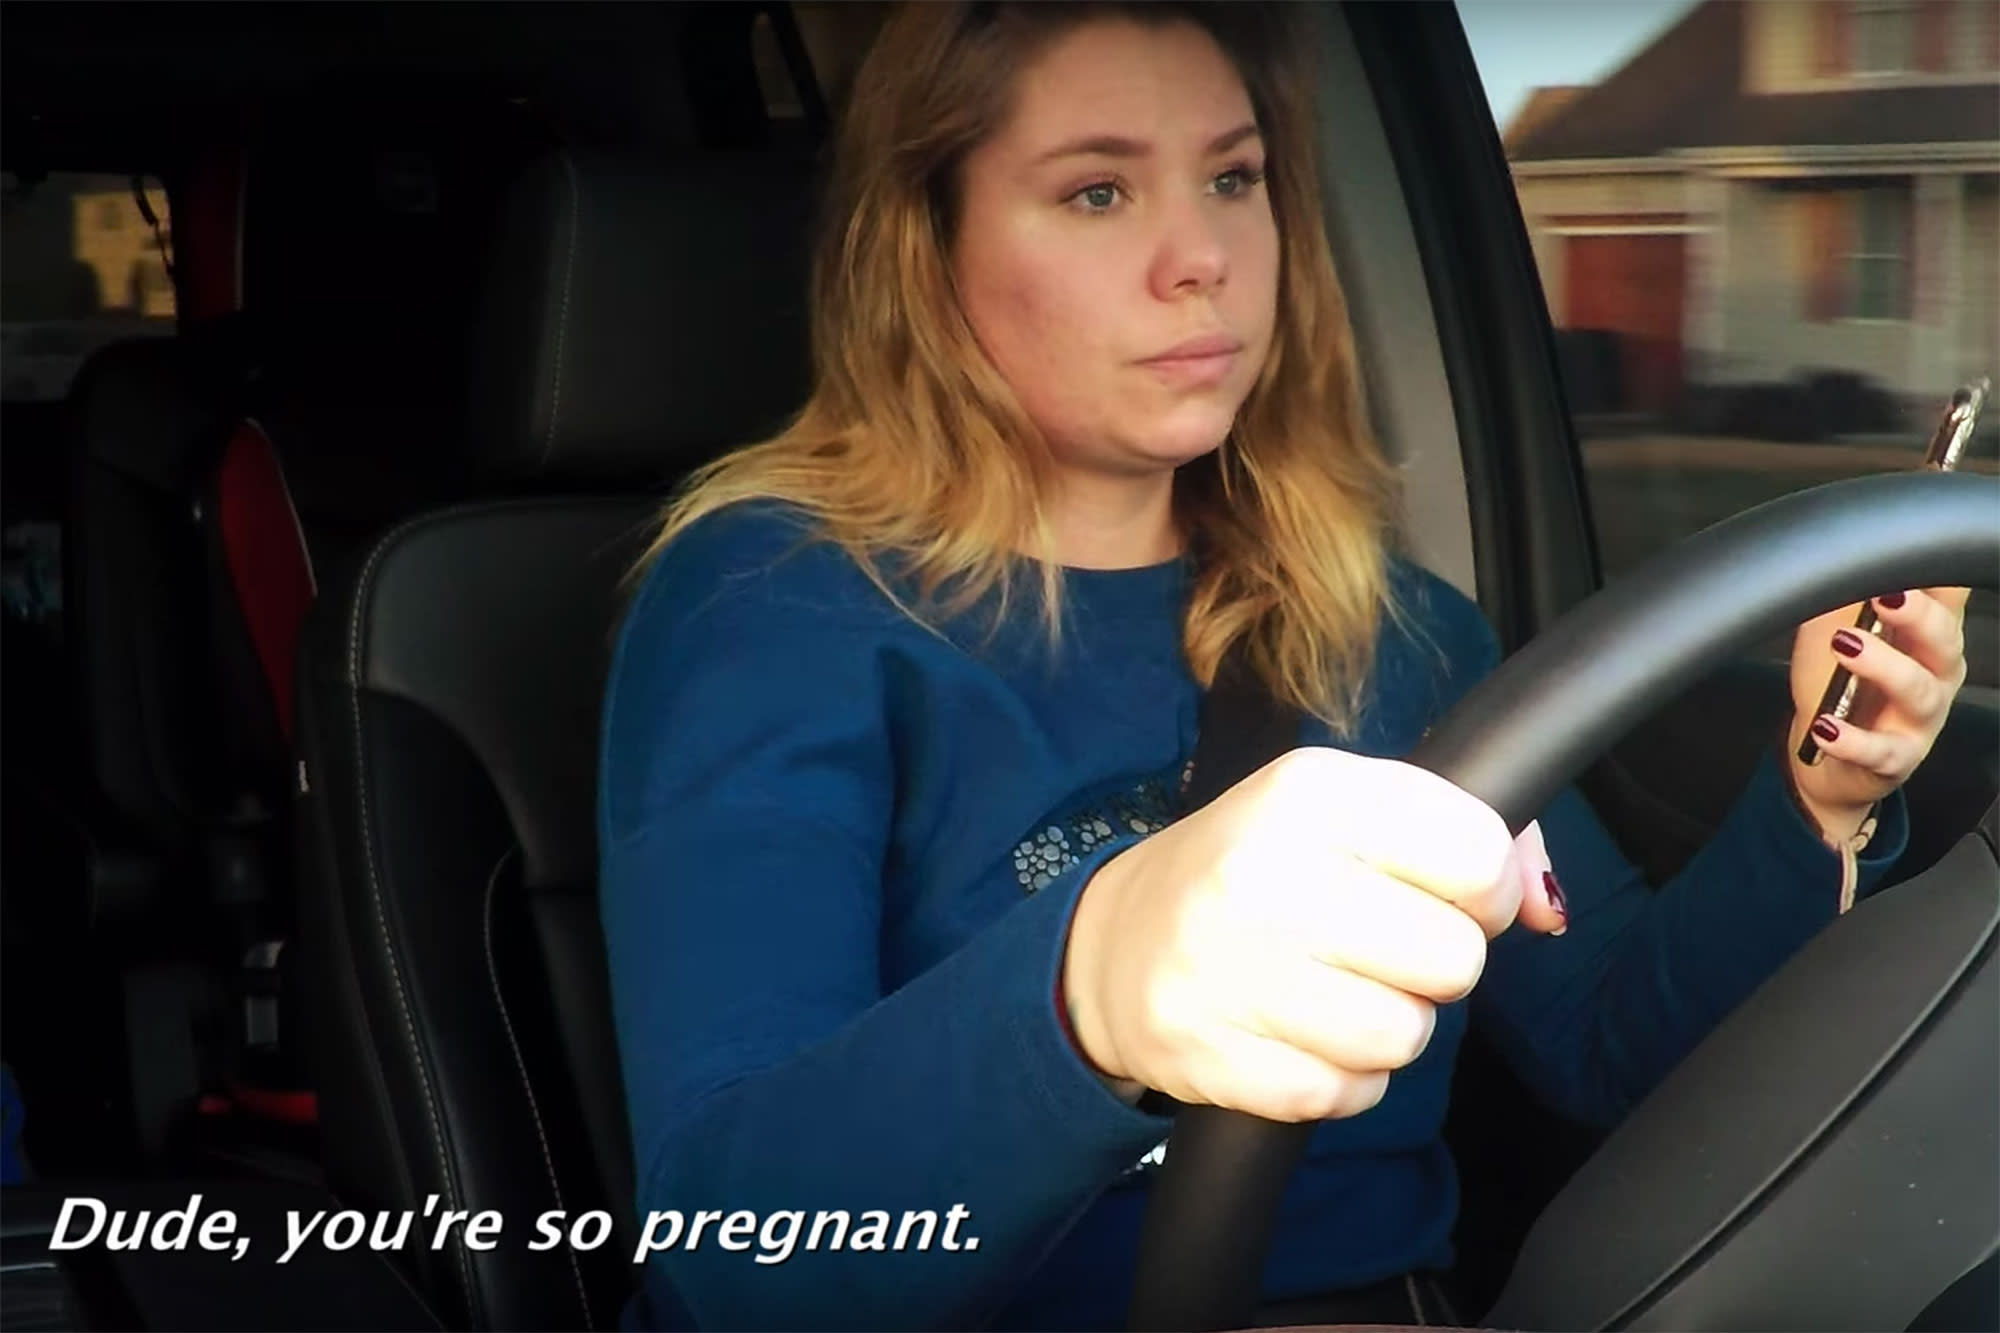 Teen Mom 2s Kailyn Lowry Avoids Pregnancy Questions As She Admits To 